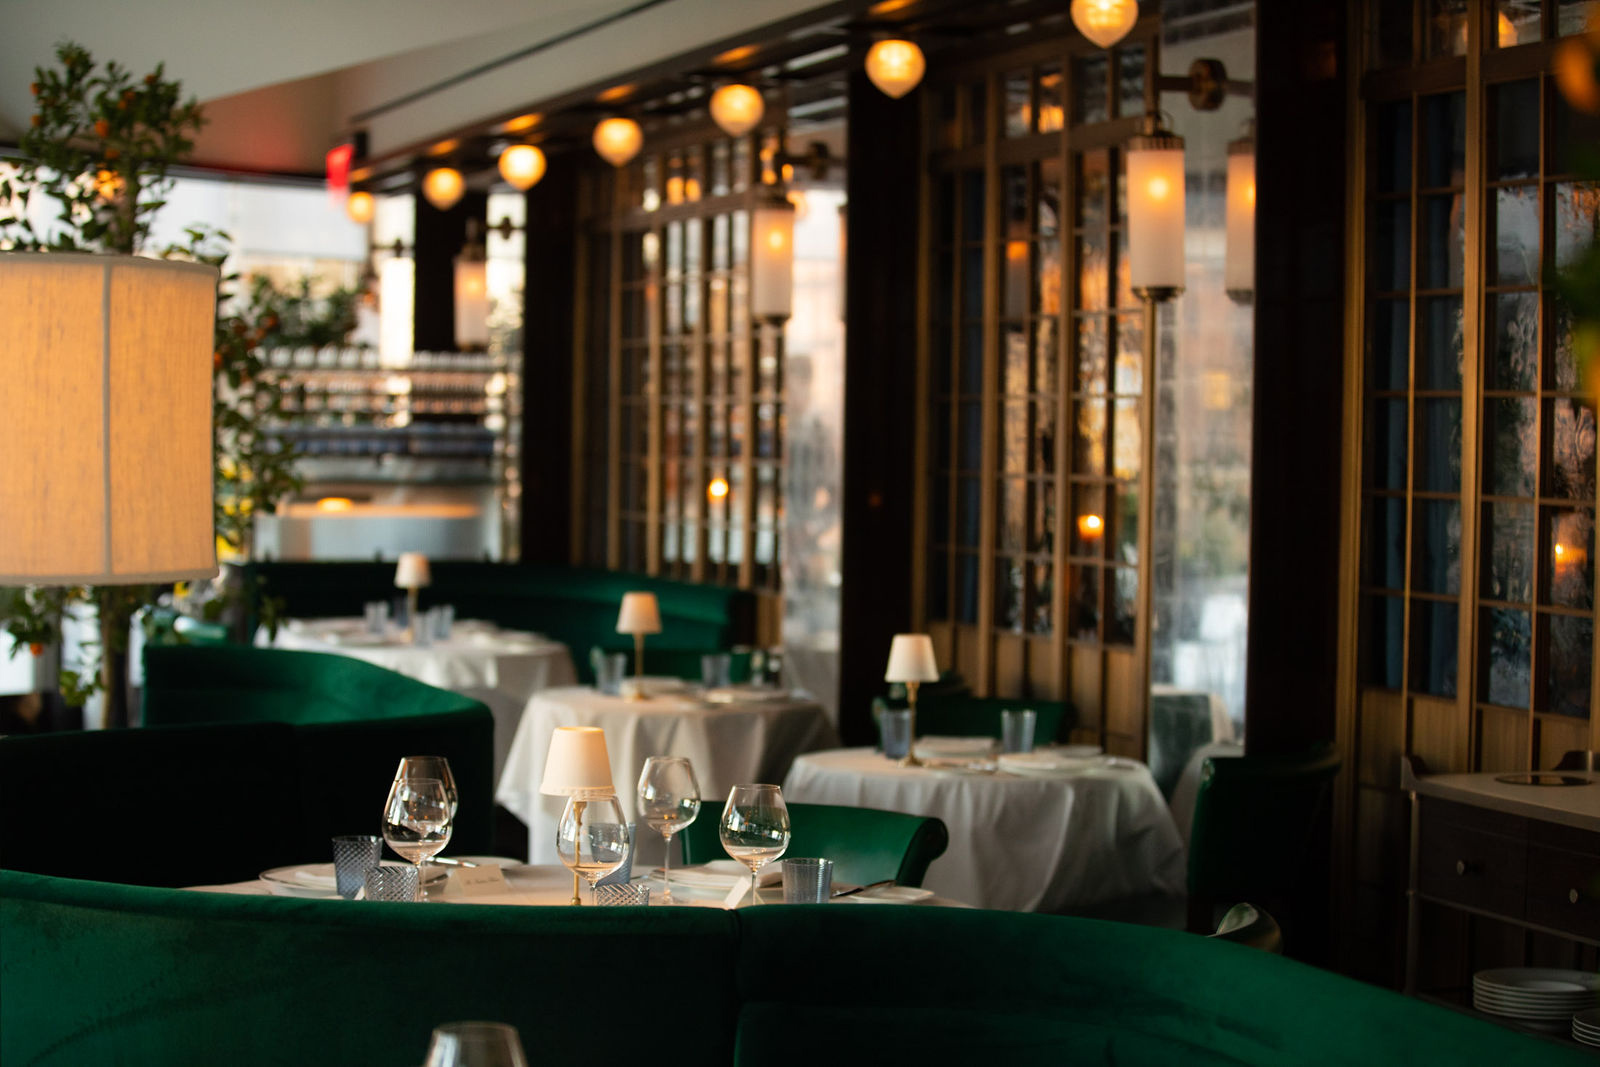 Thomas Keller TakRoom Building a restaurant experience on SquareSpace.| Jp Gary